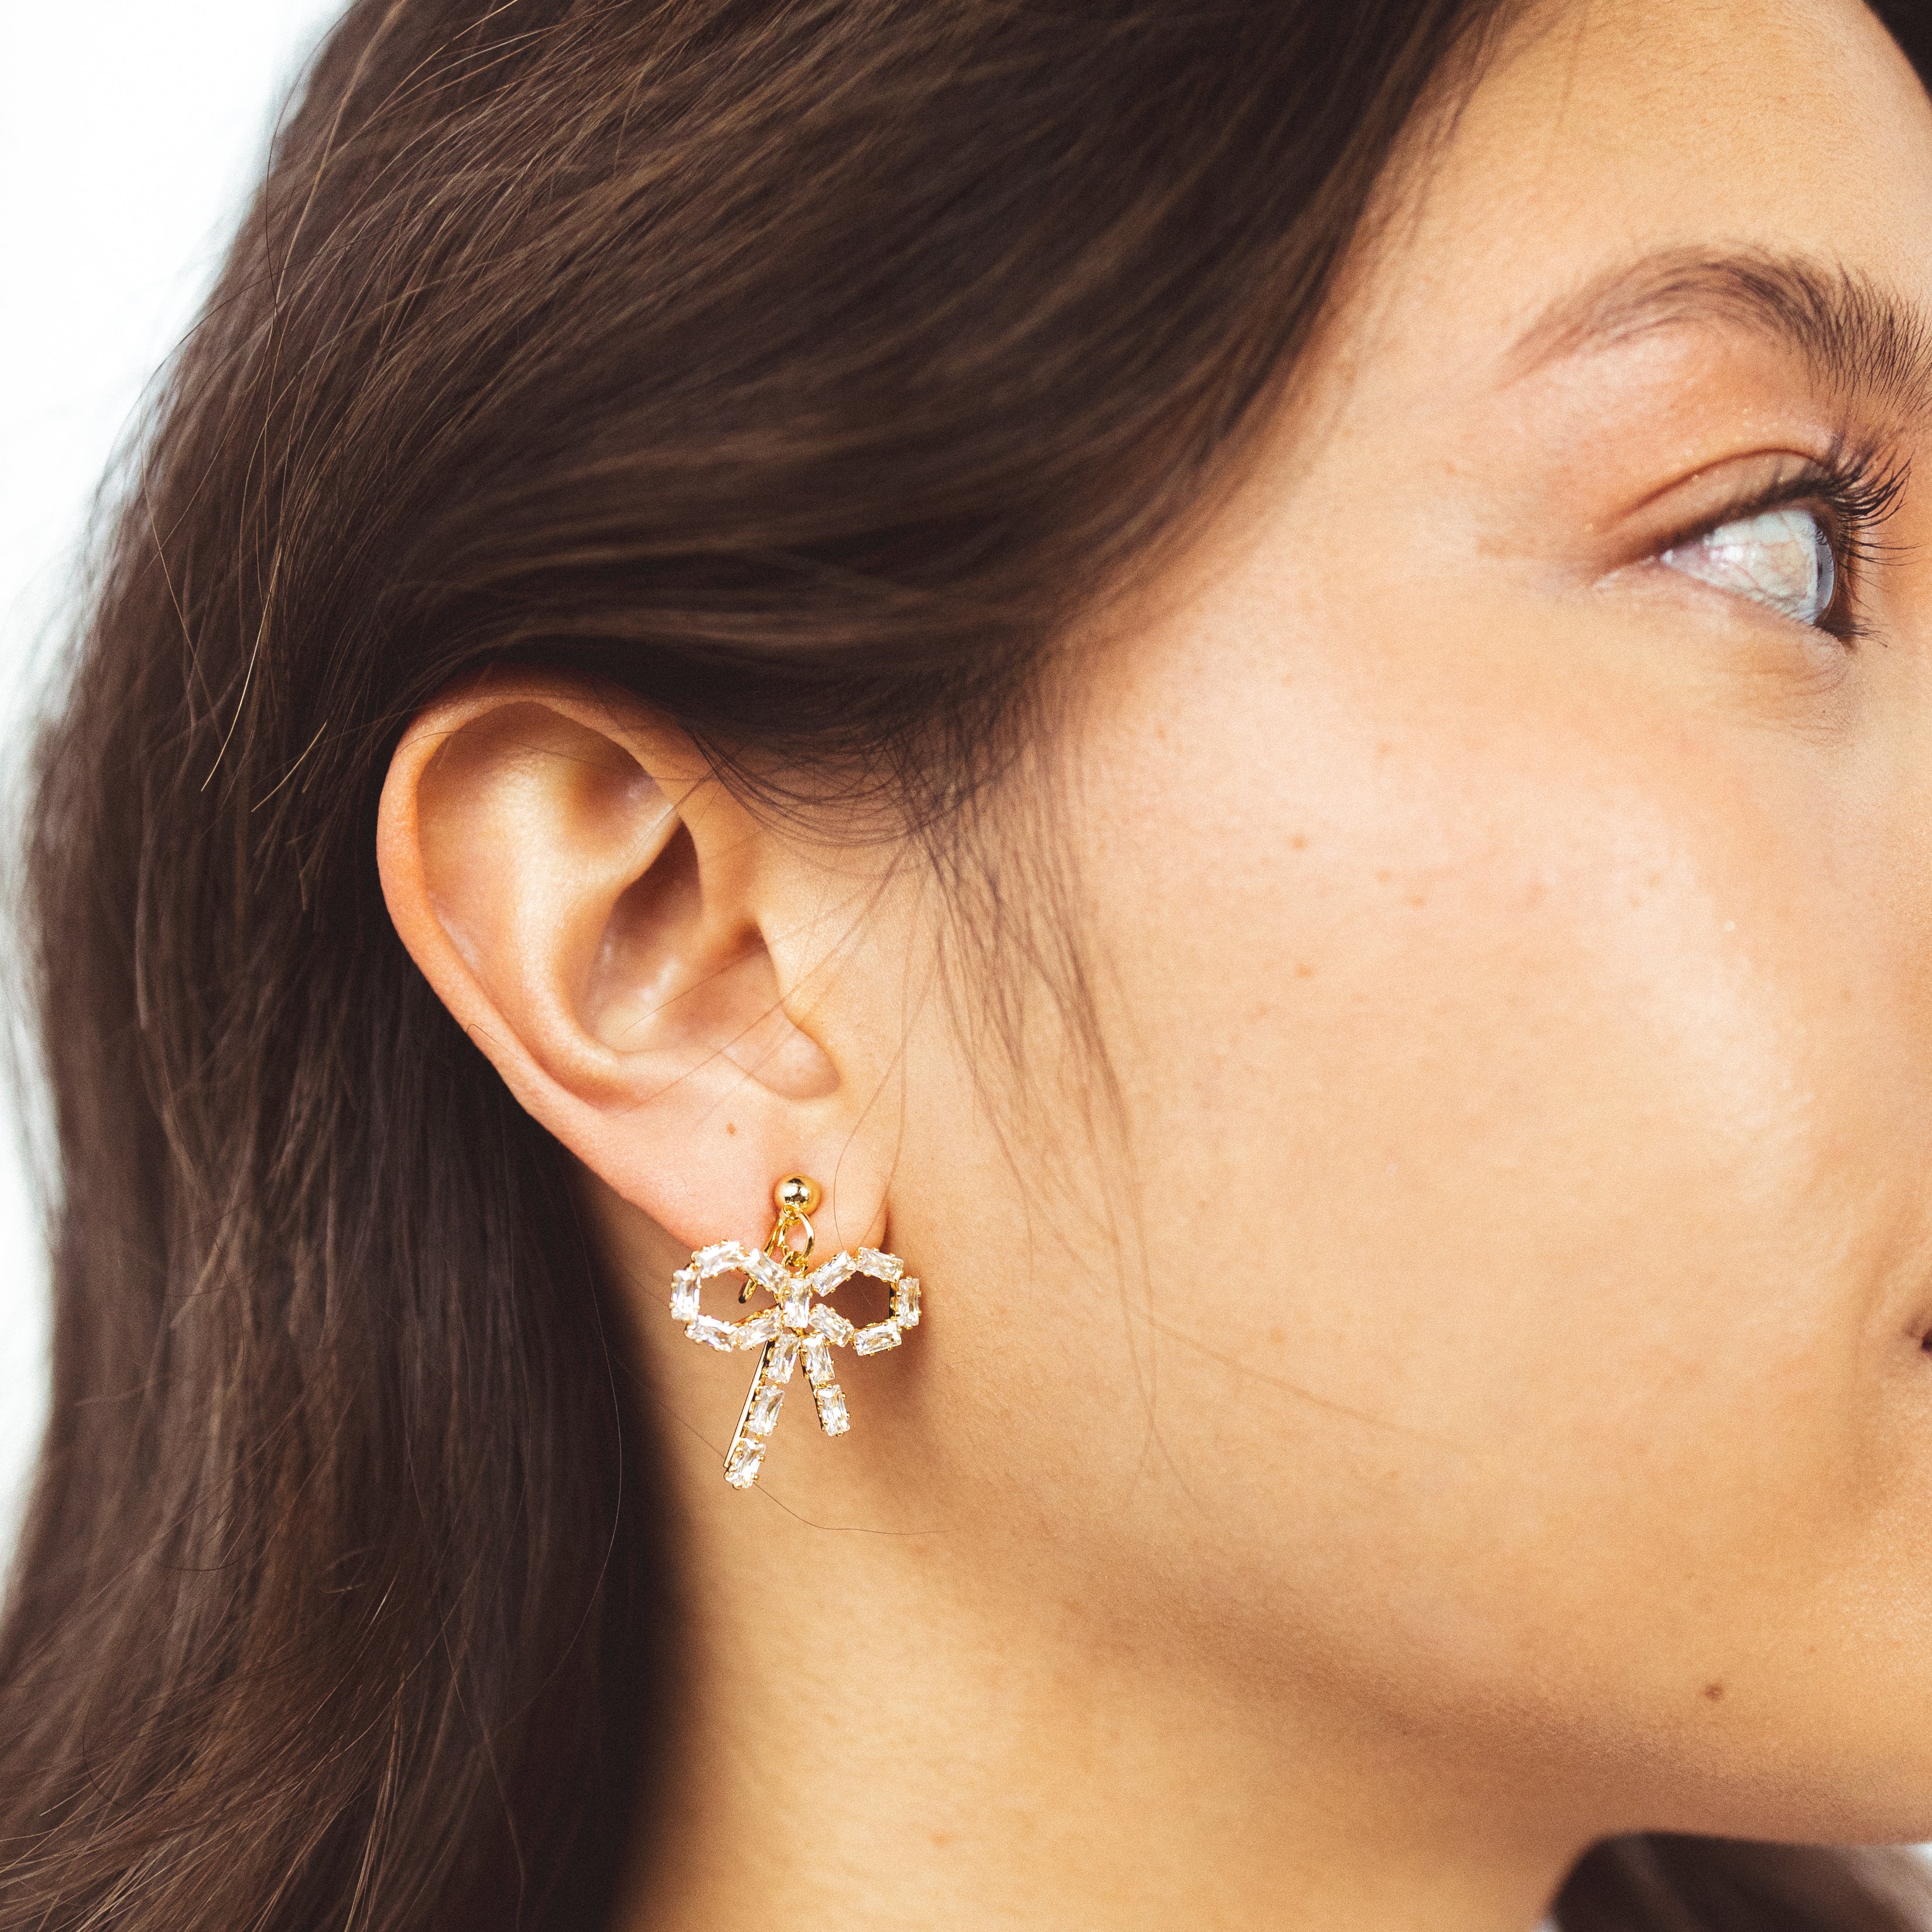 A model wearing the Jane Clip On Earrings! These stylish and versatile earrings are perfect for non-pierced ears, featuring a secure hold for up to 24 hours. With an adjustable fit and suitability for sensitive or stretched ears, they're the perfect accessory for any occasion.